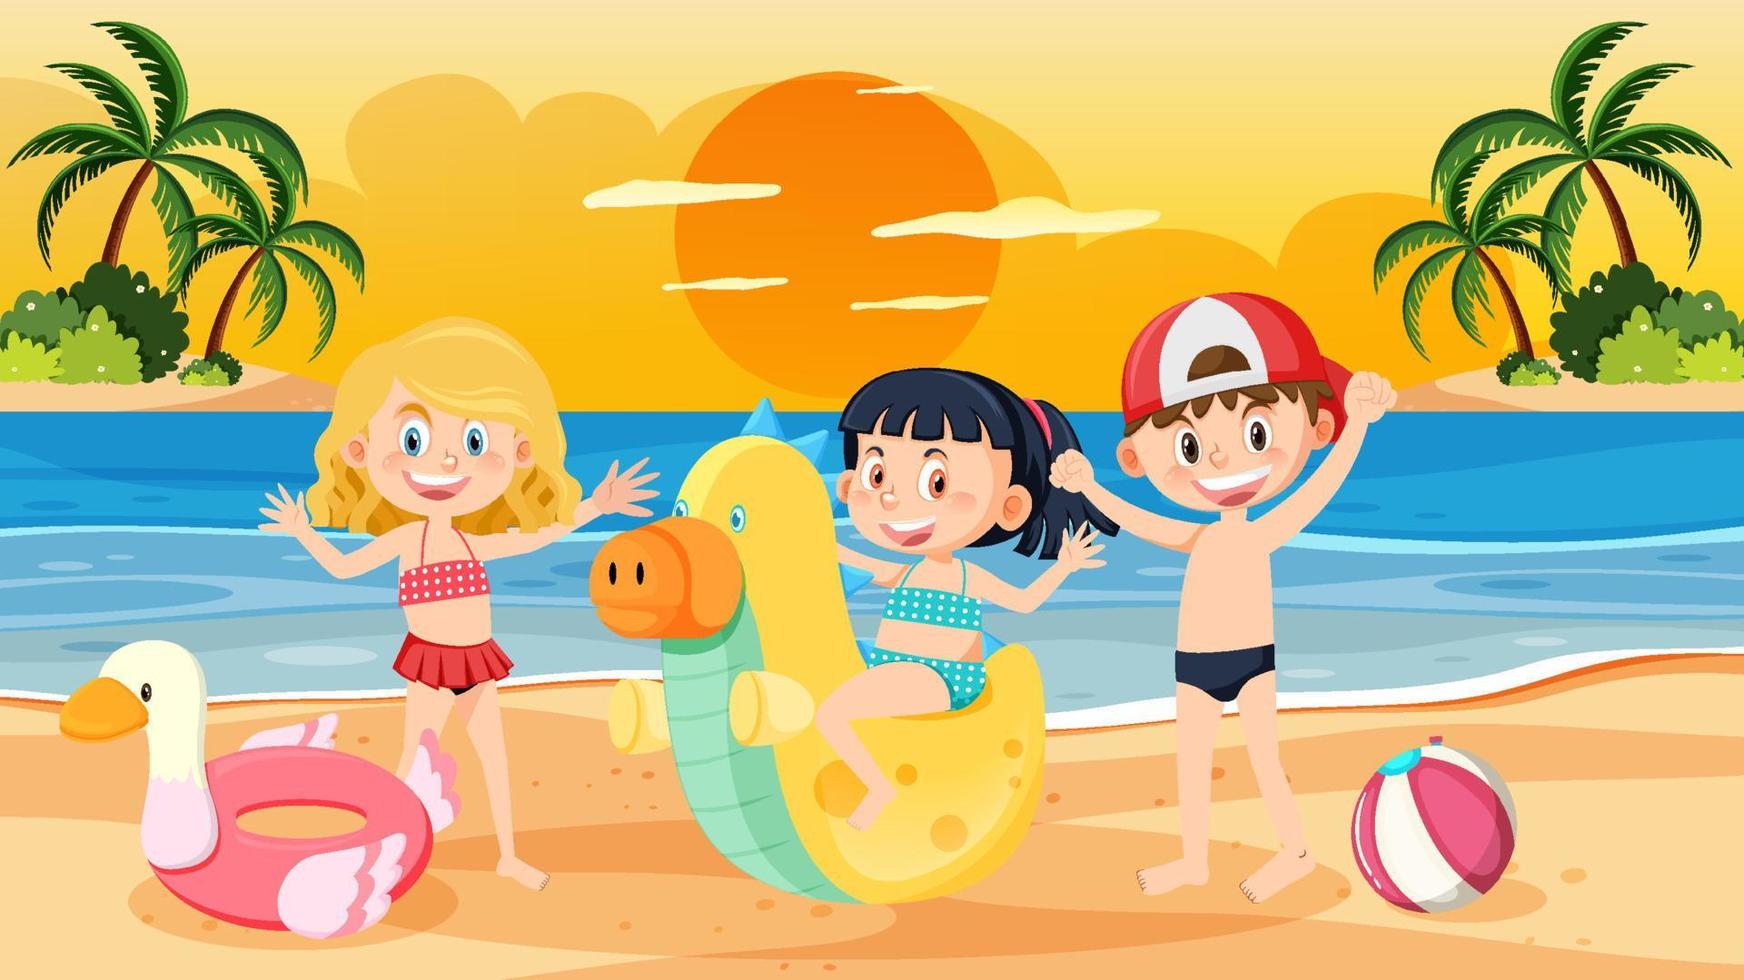 Children at the beach on summer holiday vector